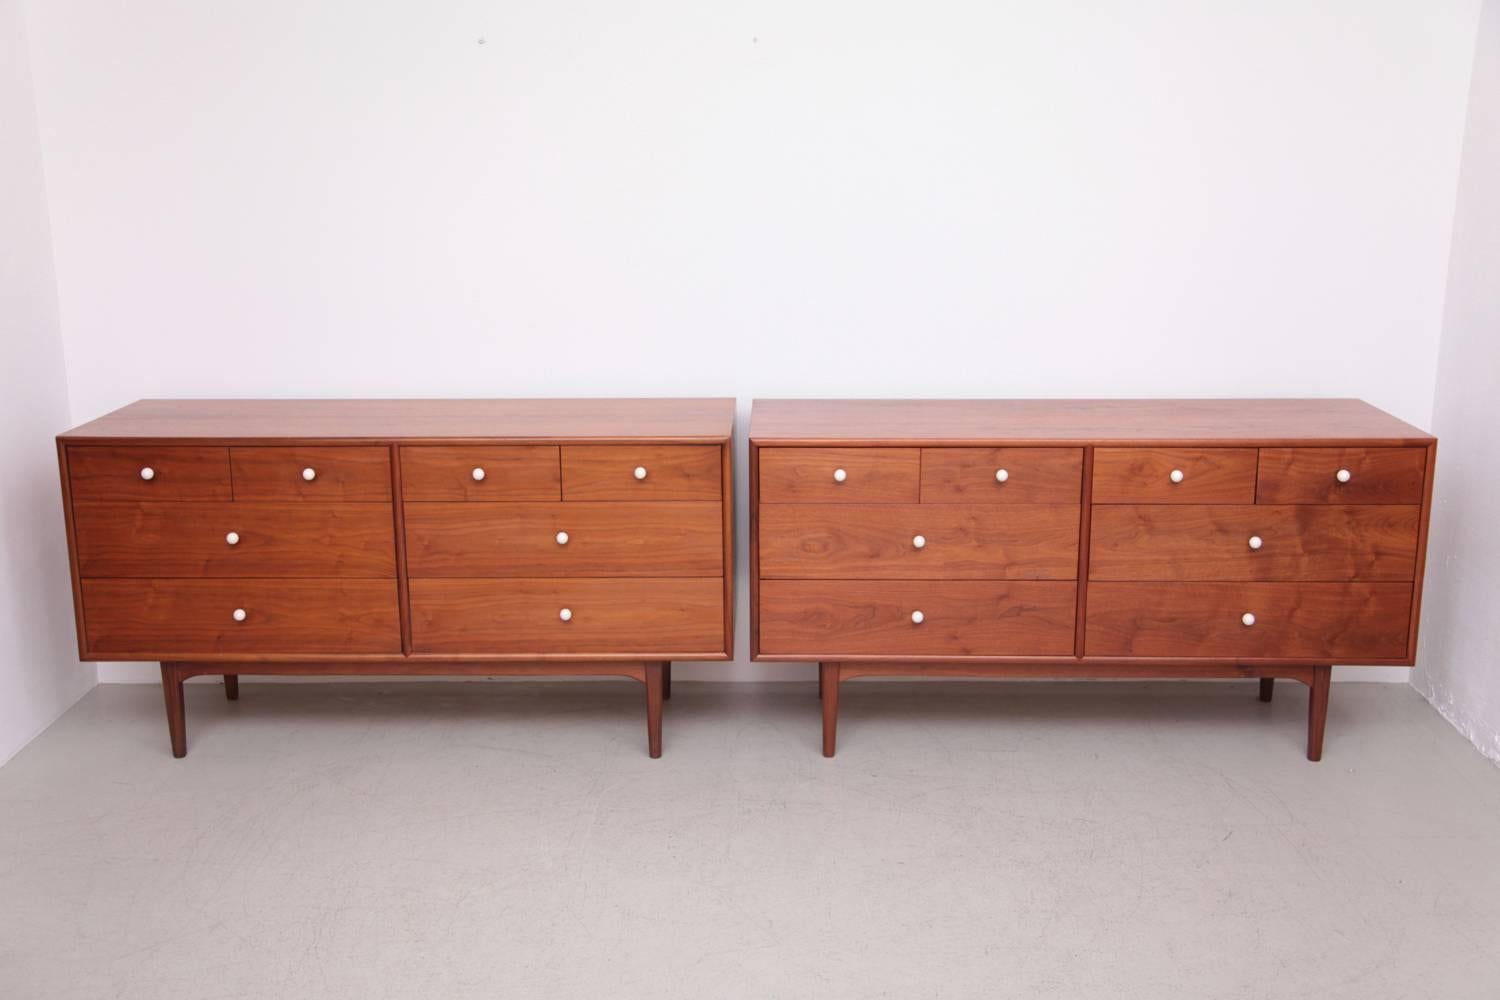 A beautiful pair of Mid-Century Modern dressers in walnut designed by Kipp Stewart and Stewart MacDougall for Drexel. Beautiful walnut grain. Original white porcelain drawer pulls in excellent condition.